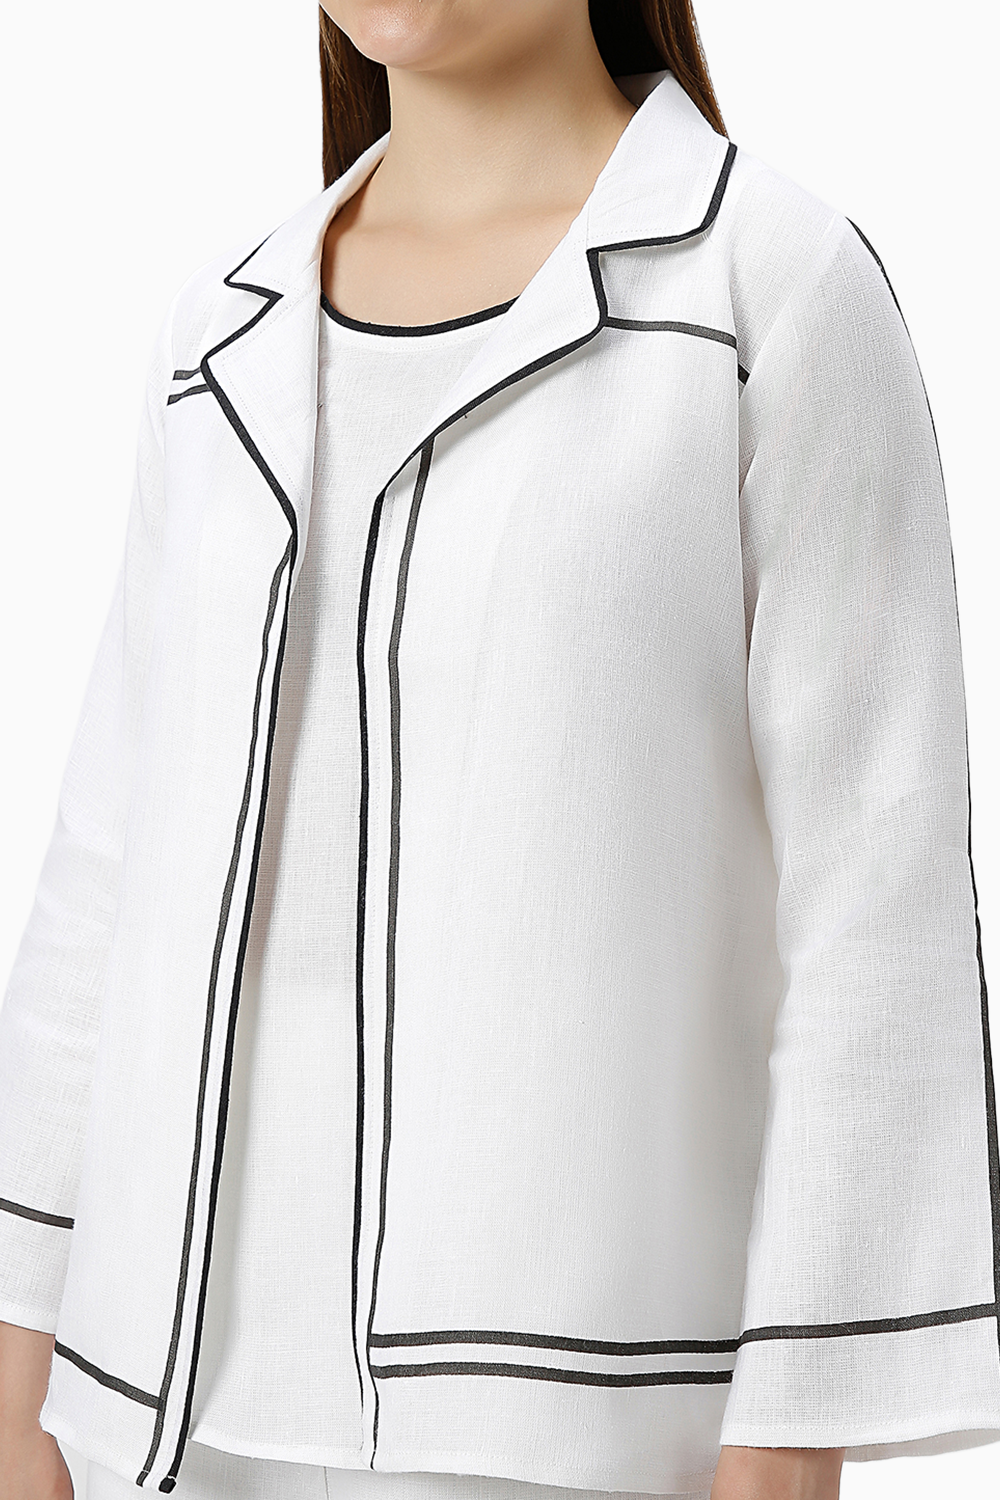 Crossroad White Jacket with B-shell and Pant